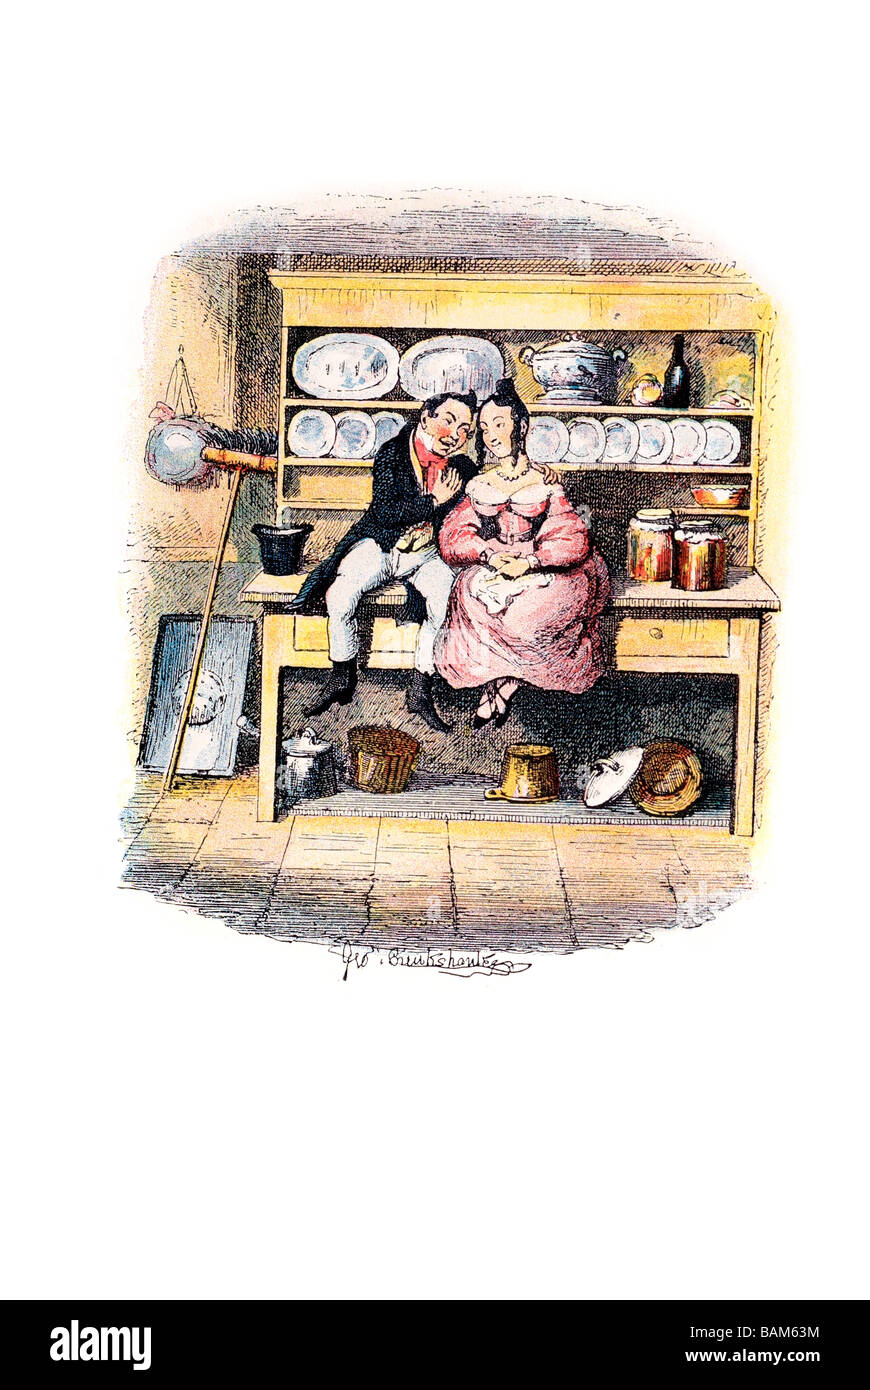 kitchen courtship Hard Times - For These Times. is a novel by Charles Dickens, first published in 1854. Stock Photo